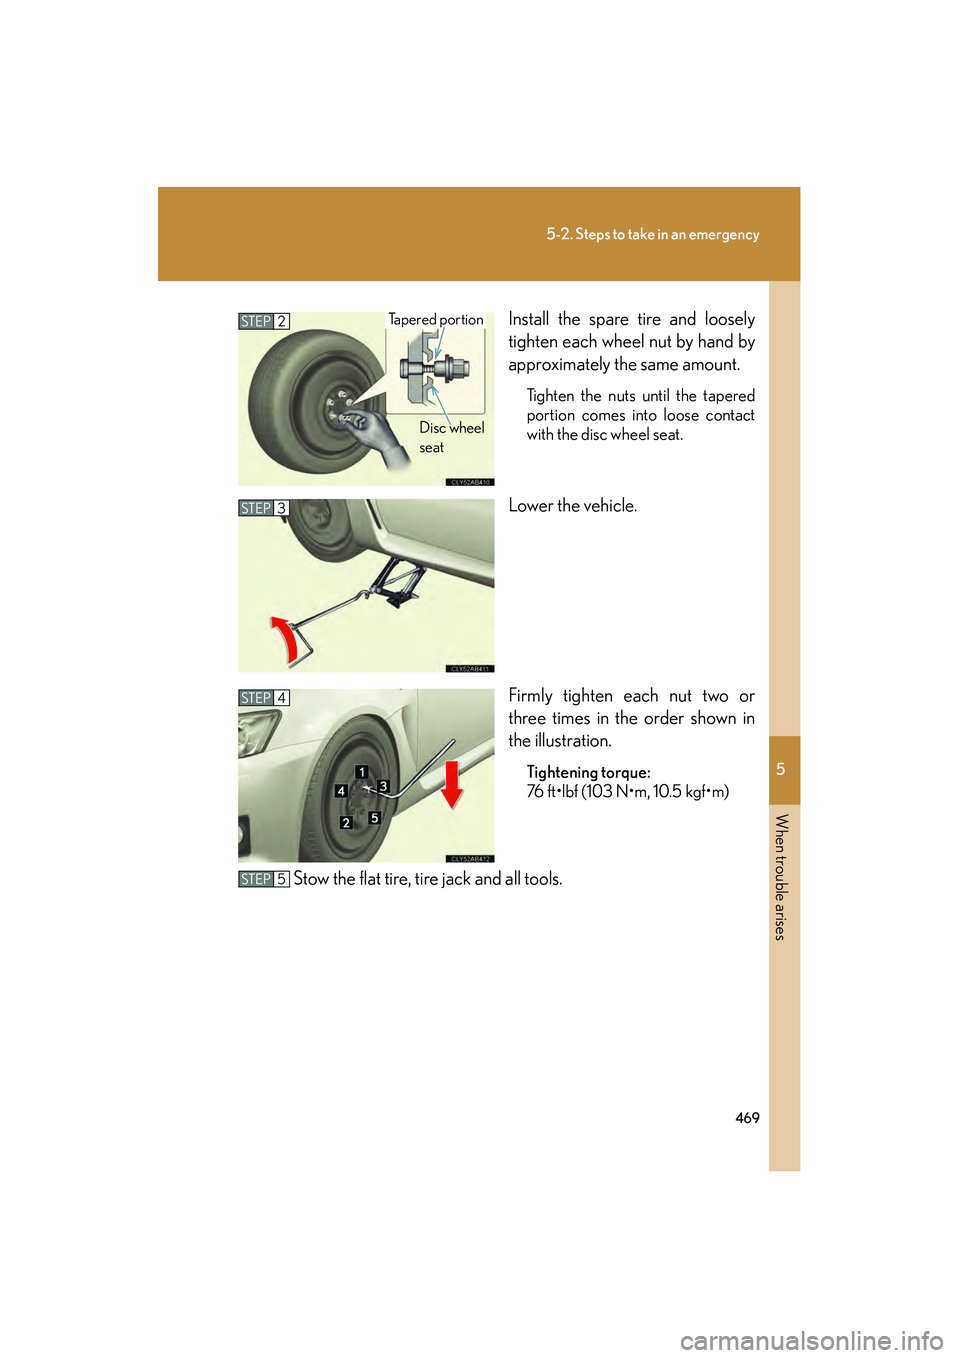 Lexus IS F 2010  Owners Manual 5
When trouble arises
469
5-2. Steps to take in an emergency
10_IS F_UInstall the spare tire and loosely
tighten each wheel nut by hand by
approximately the same amount.
Tighten the nuts until the tap